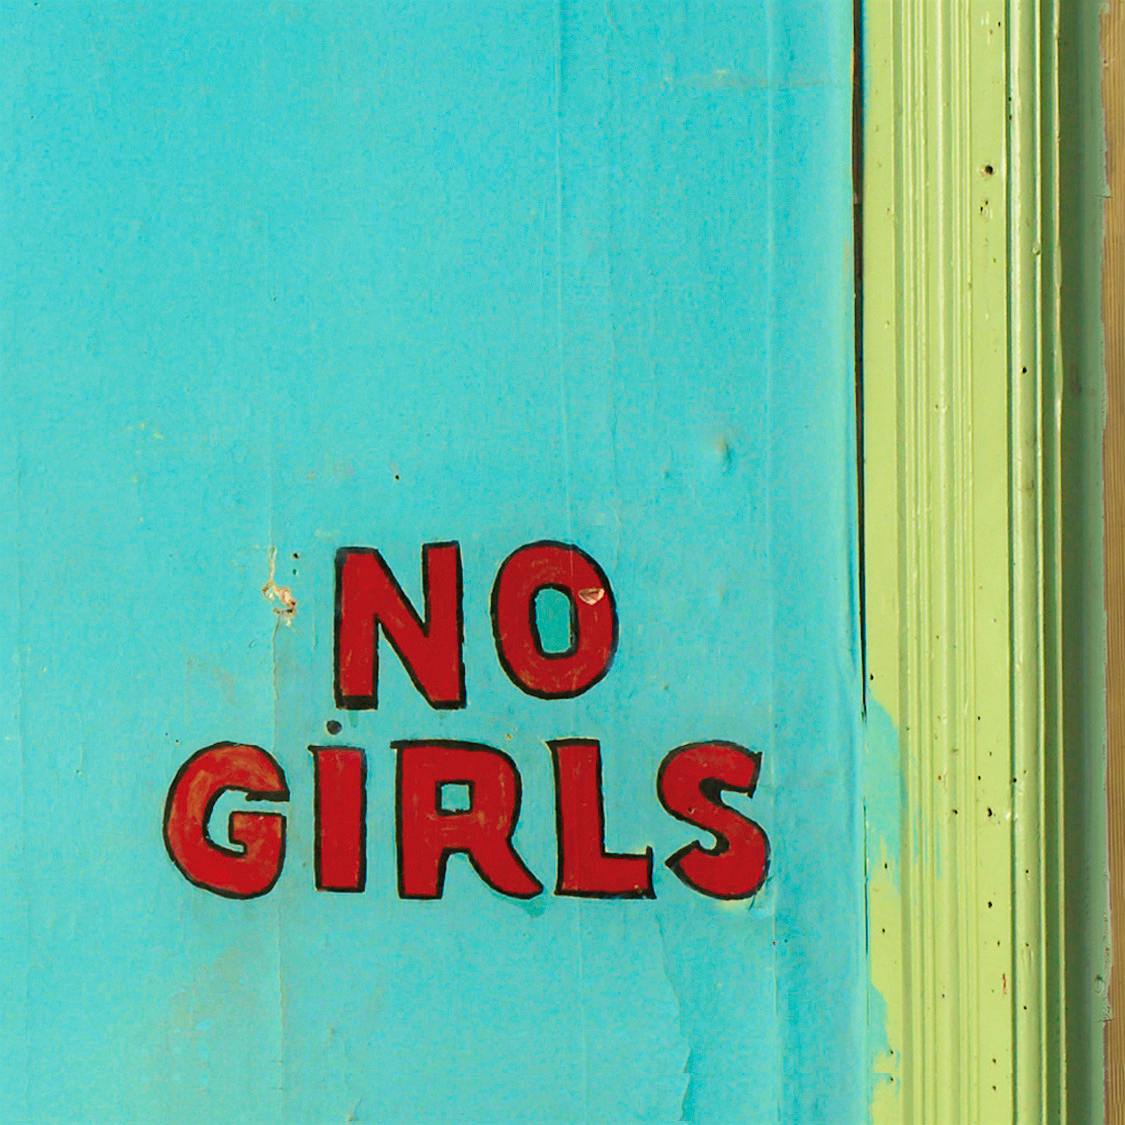 Label for No Girls